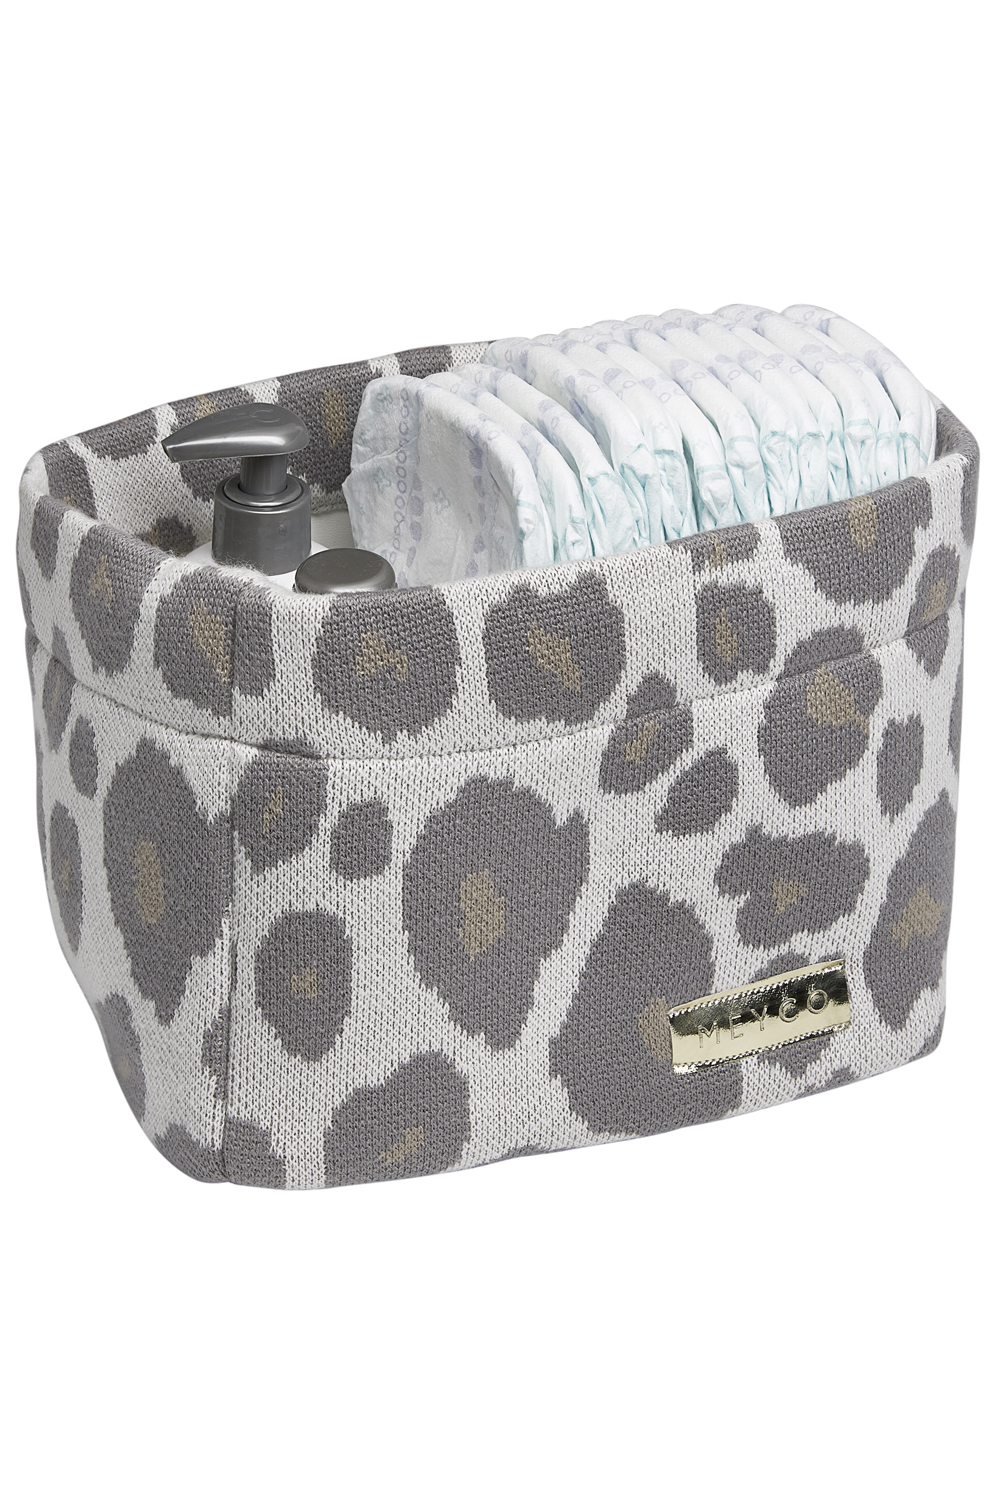 Storage Basket Panther - Neutral - Small